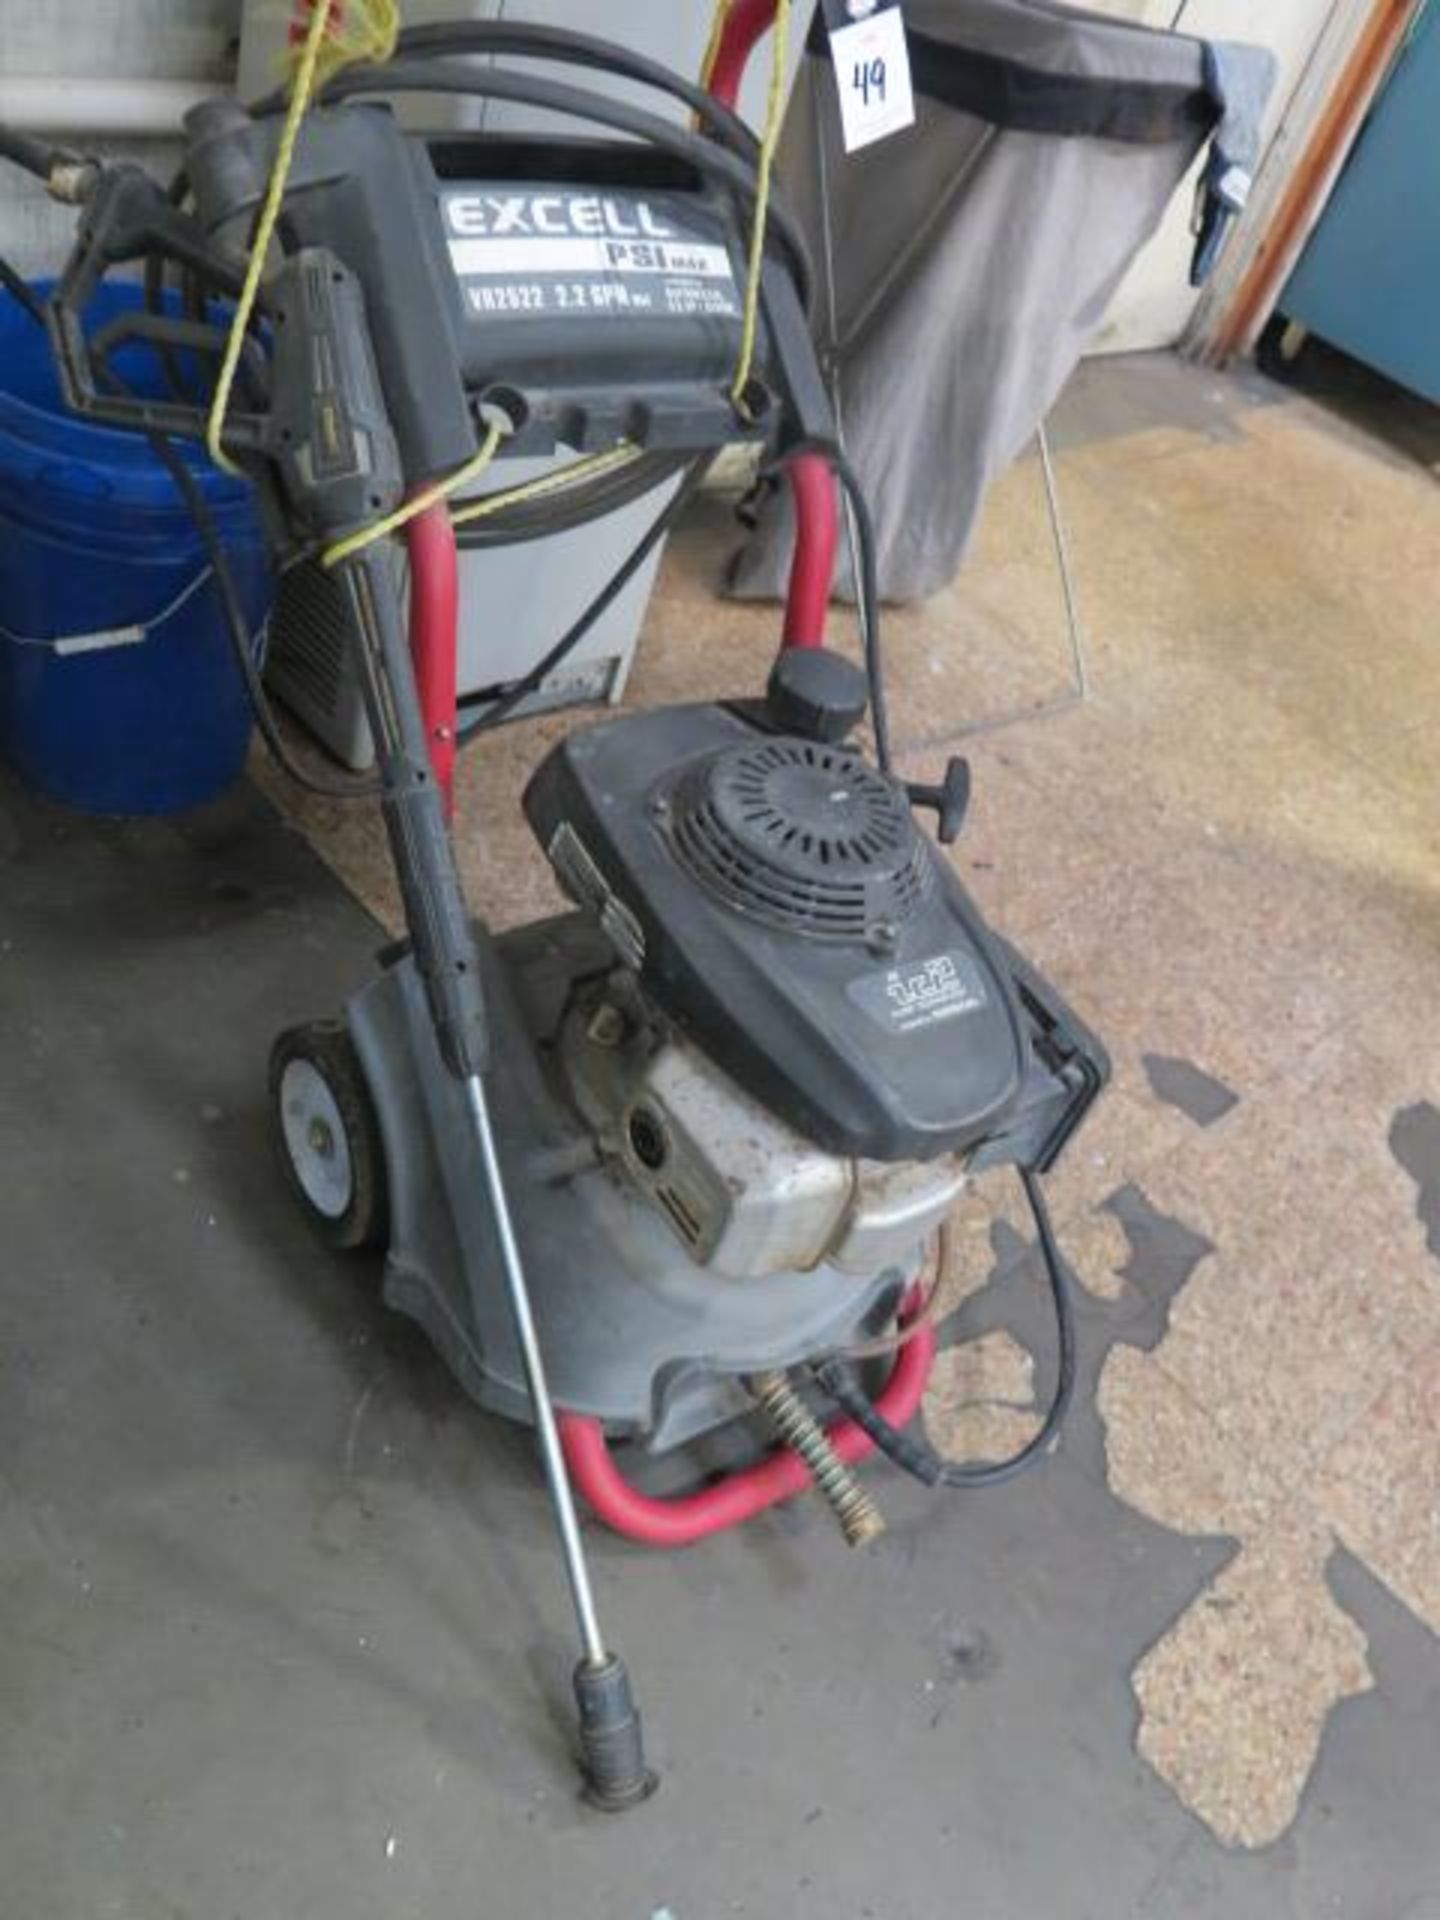 Excell VR2522 5.5Hp Pressure Washer (SOLD AS-IS - NO WARRANTY) - Image 4 of 6